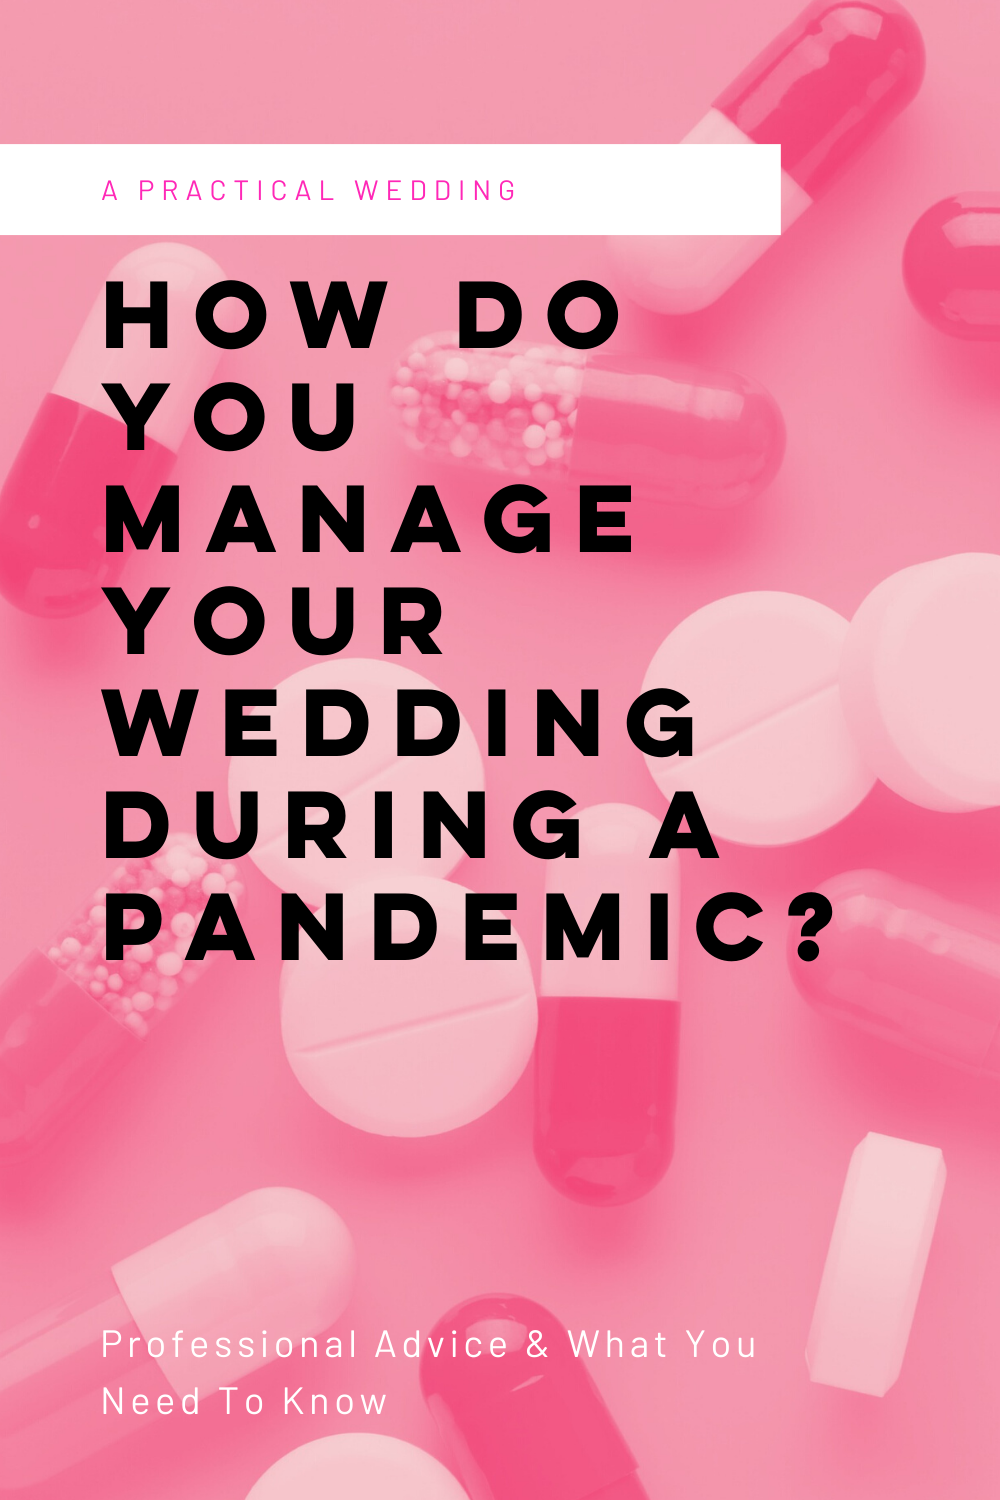 pink medicine with a text overlay offering professional advice on how to manage your wedding during a pandemic